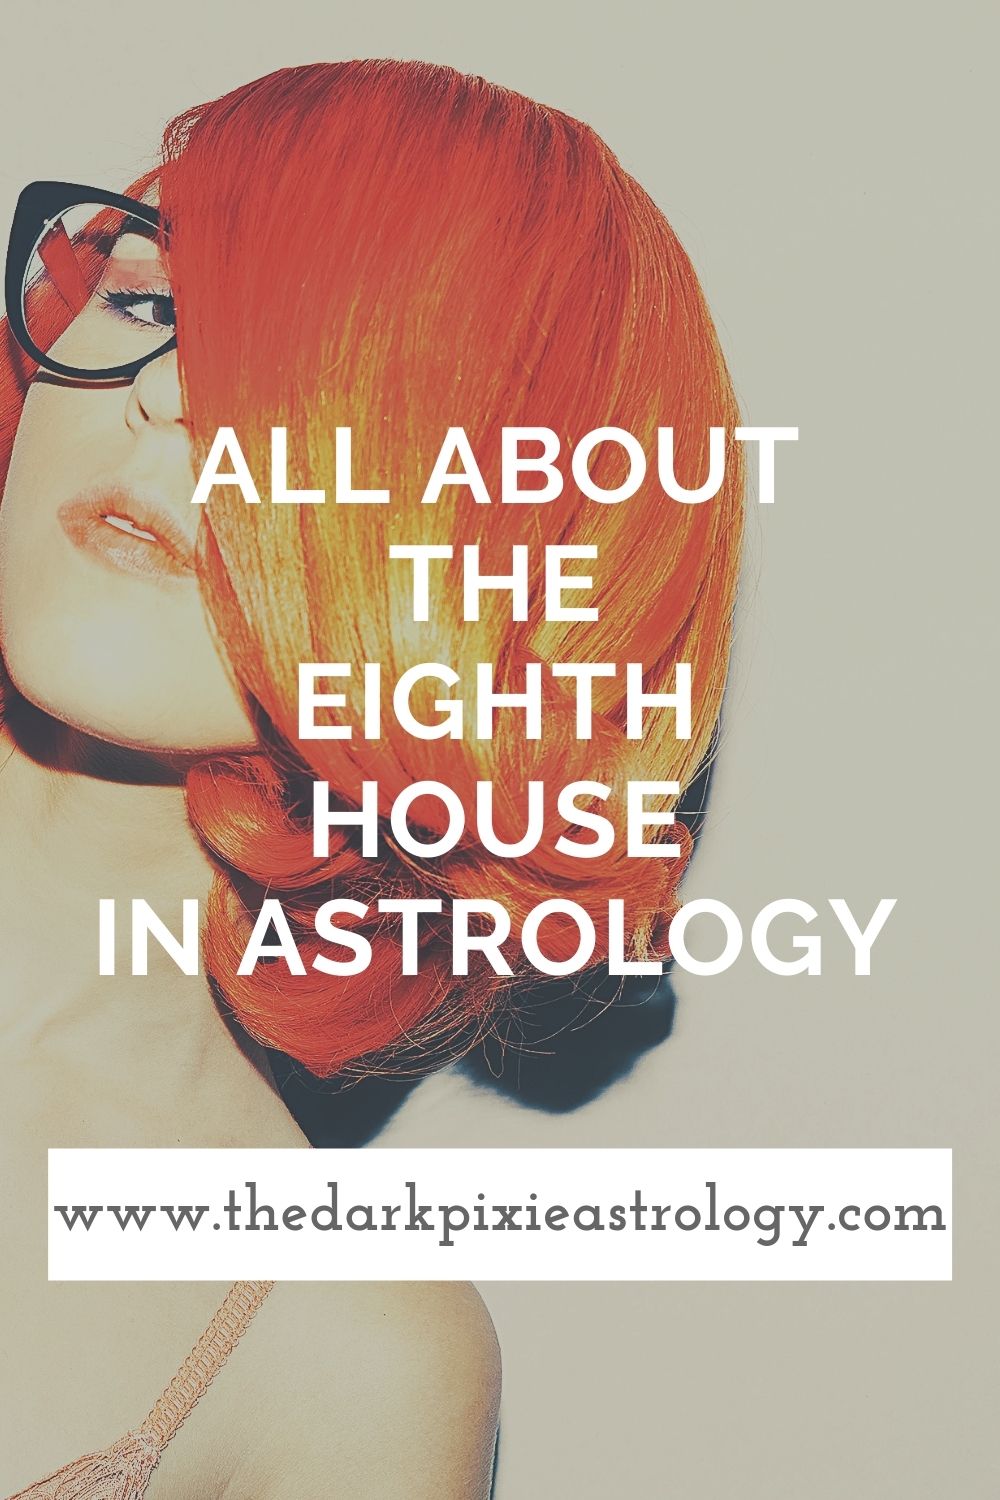 All About the Eighth House in Astrology - The Dark Pixie Astrology